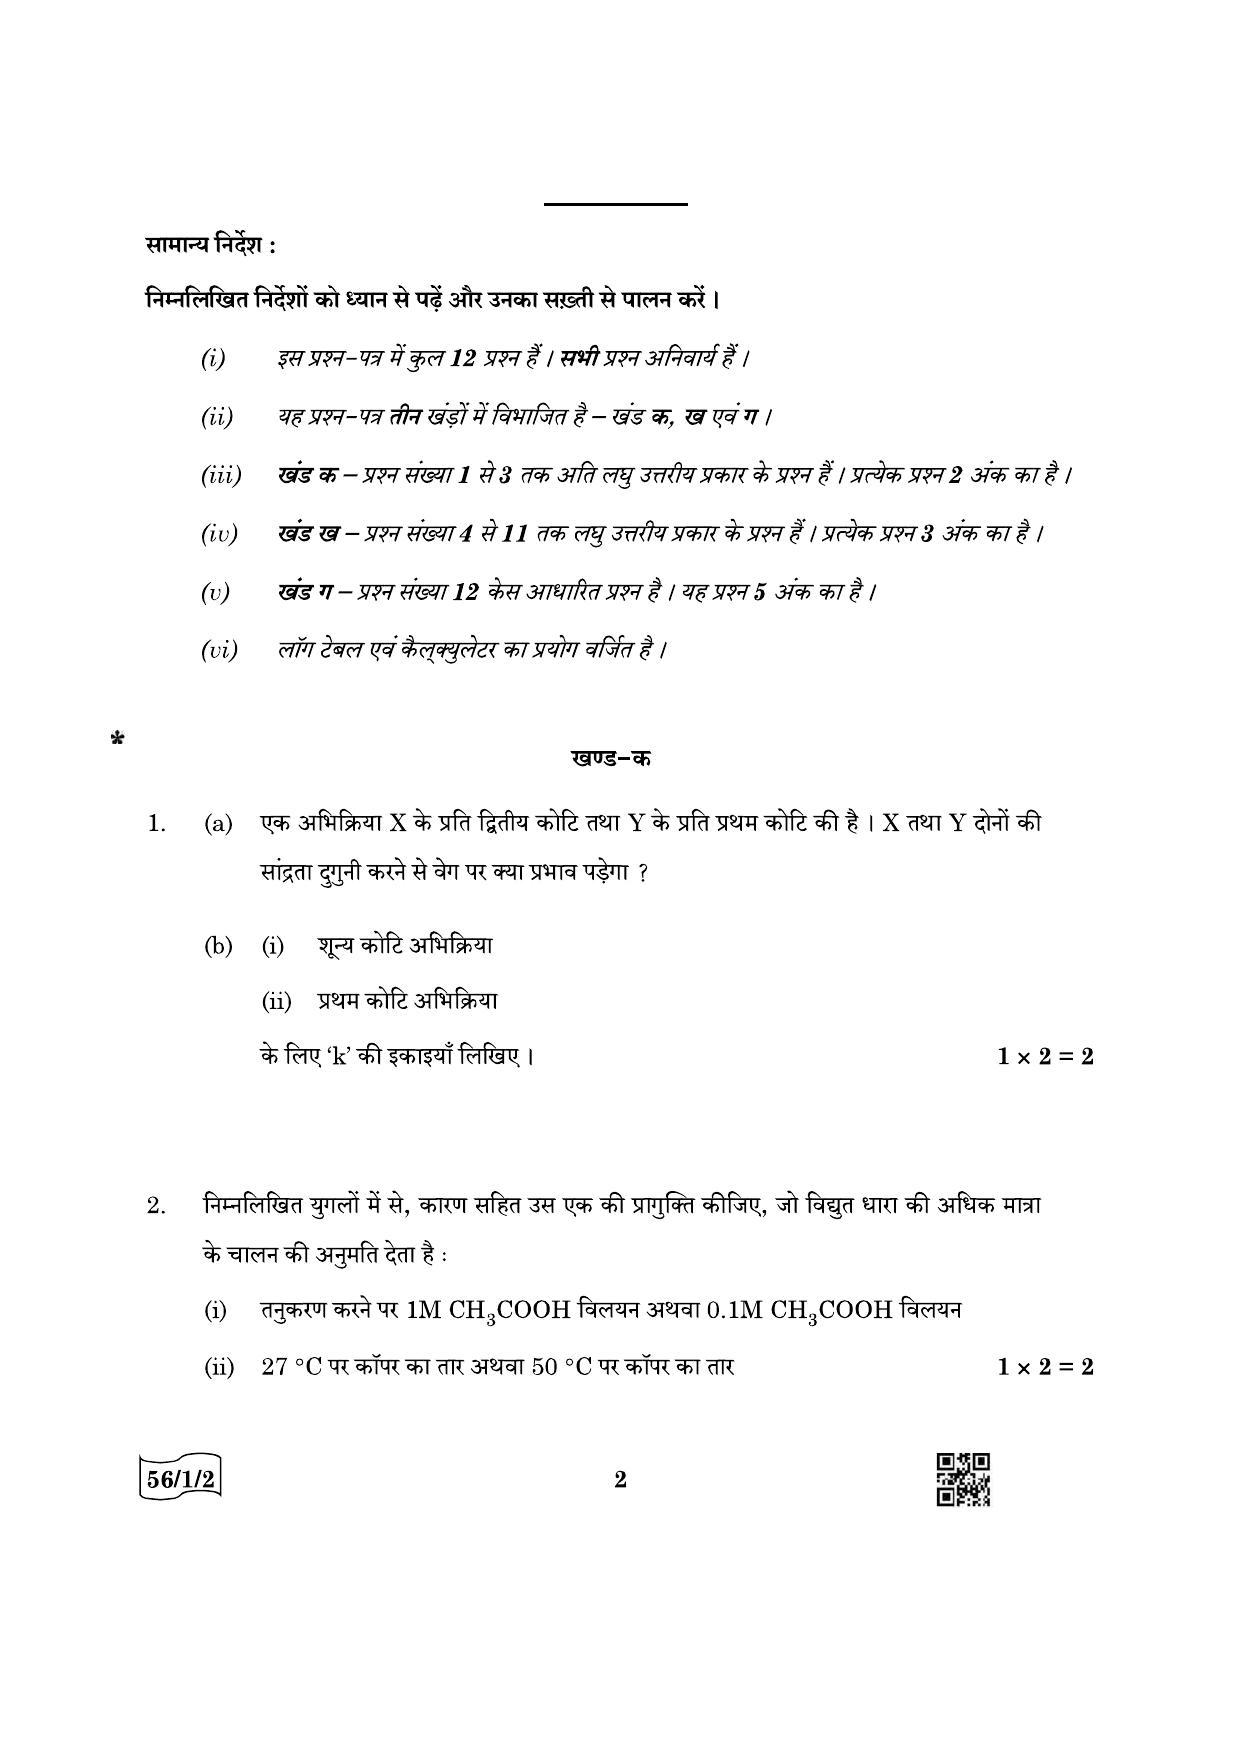 CBSE Class 12 56-1-2 Chemistry 2022 Question Paper - Page 2